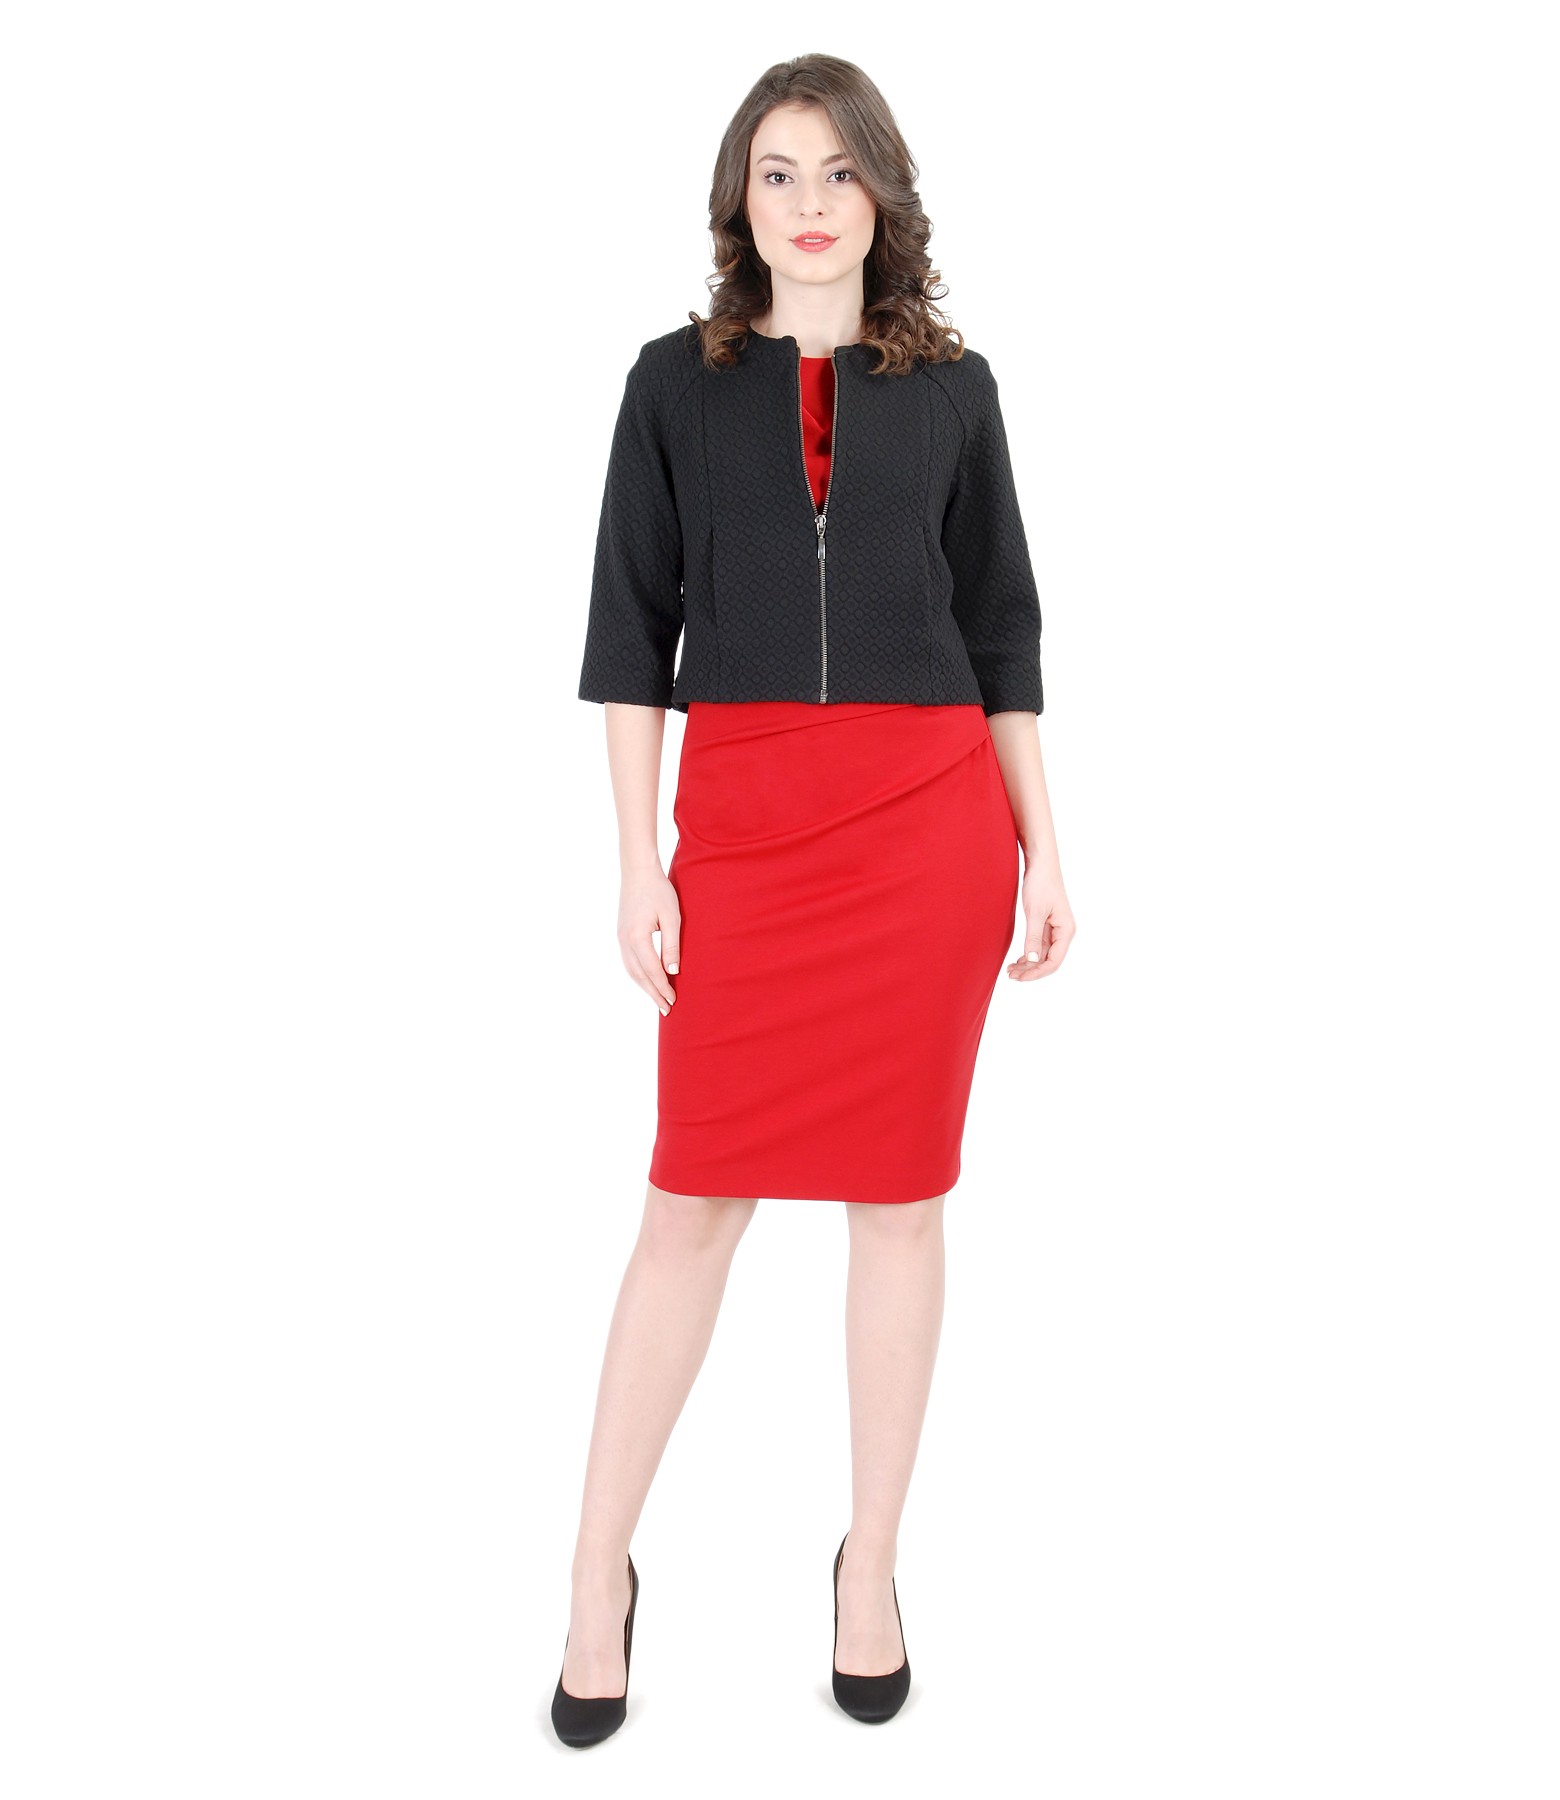 Brocade jacket with thick elastic jersey dress with folds - YOKKO